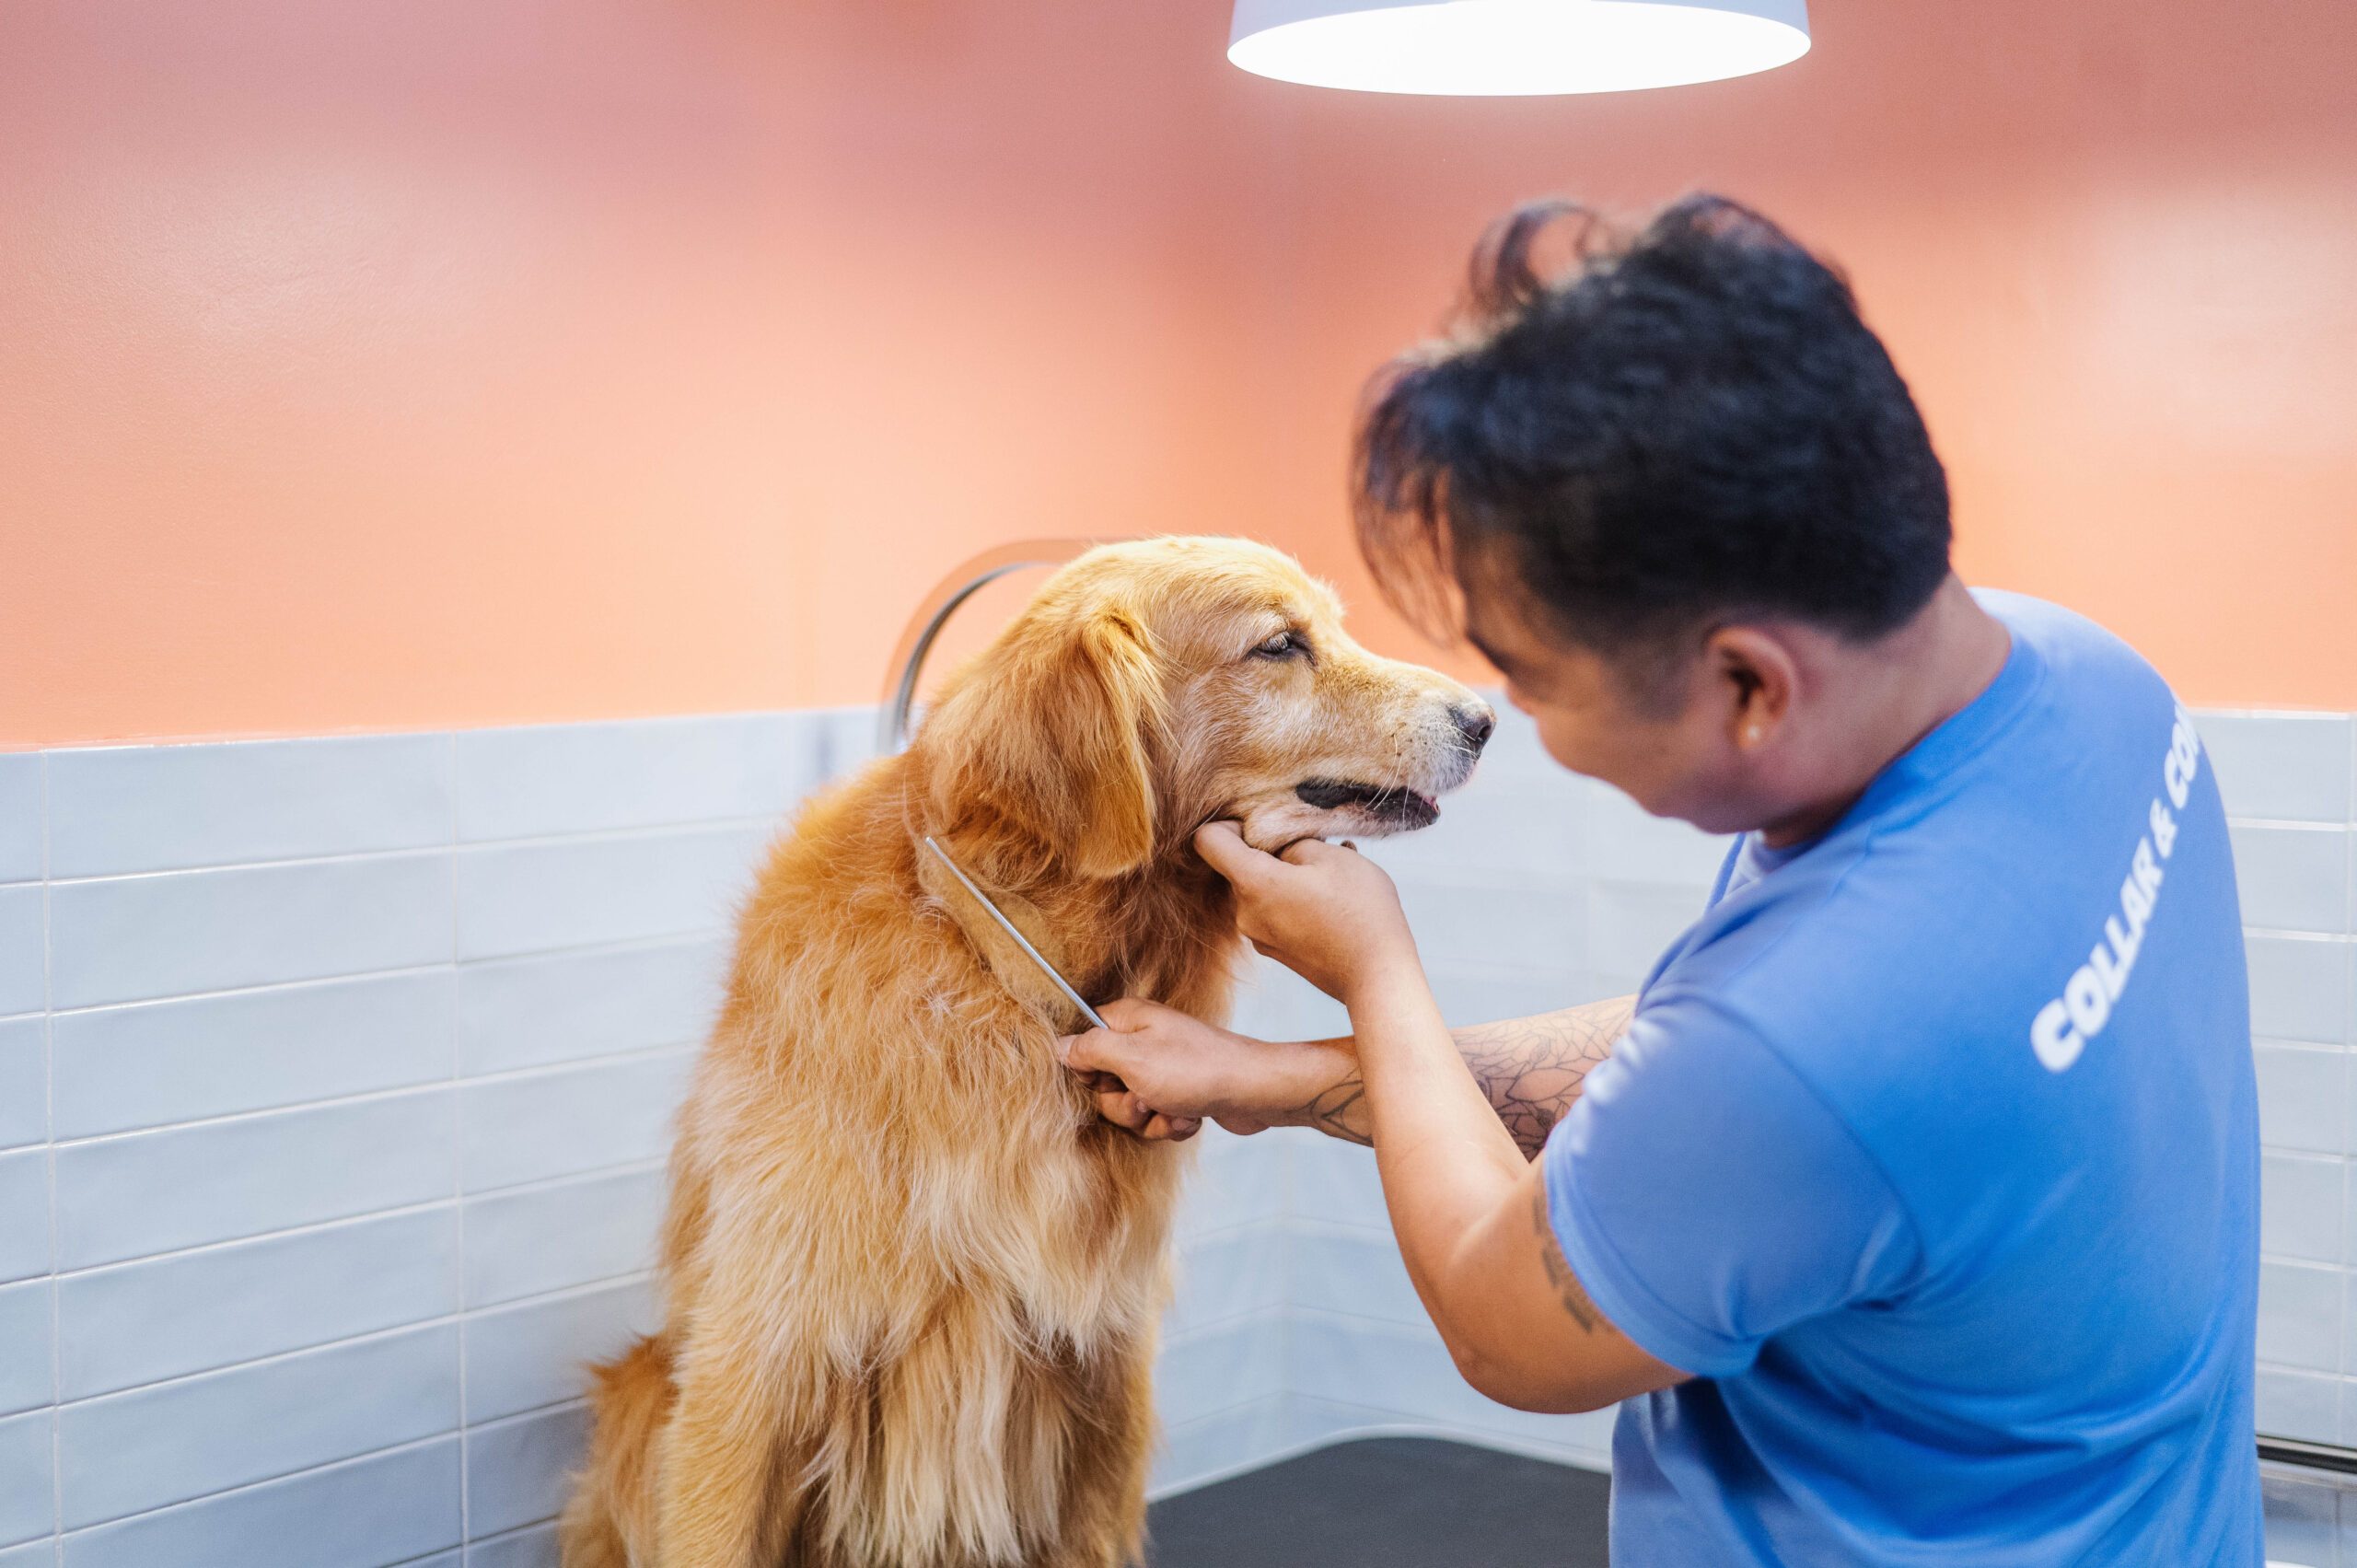 What you need to know about dog grooming – at home, and by the pros